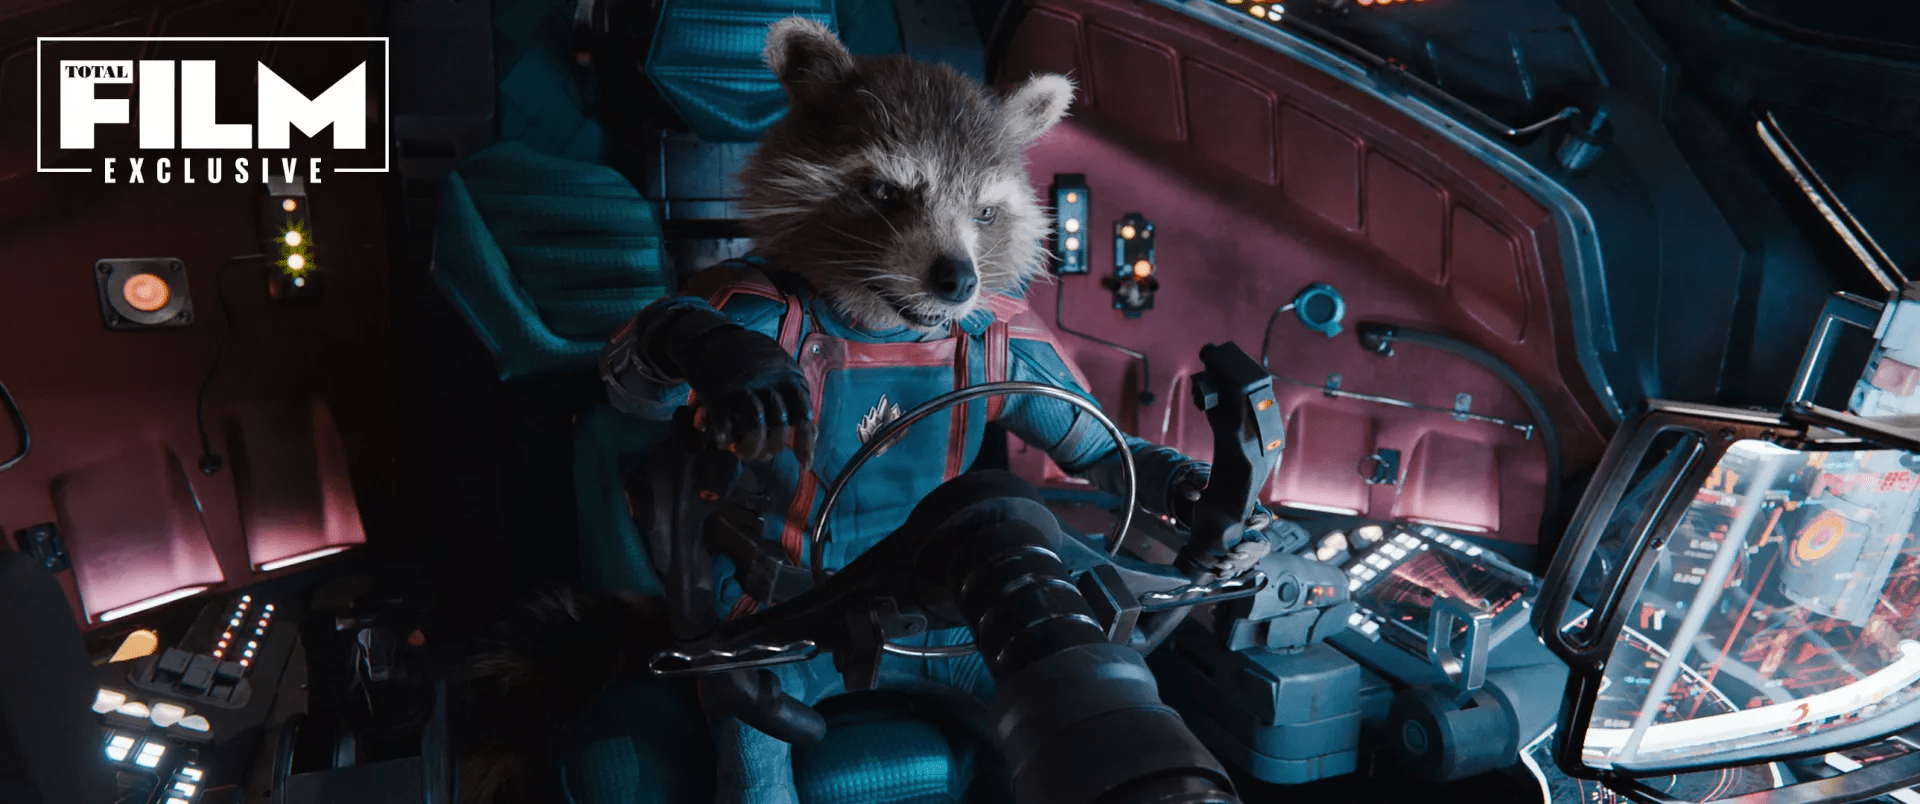 ‘Guardians of the Galaxy Vol. 3’ Is a Rocket Racoon Story, Says James Gunn